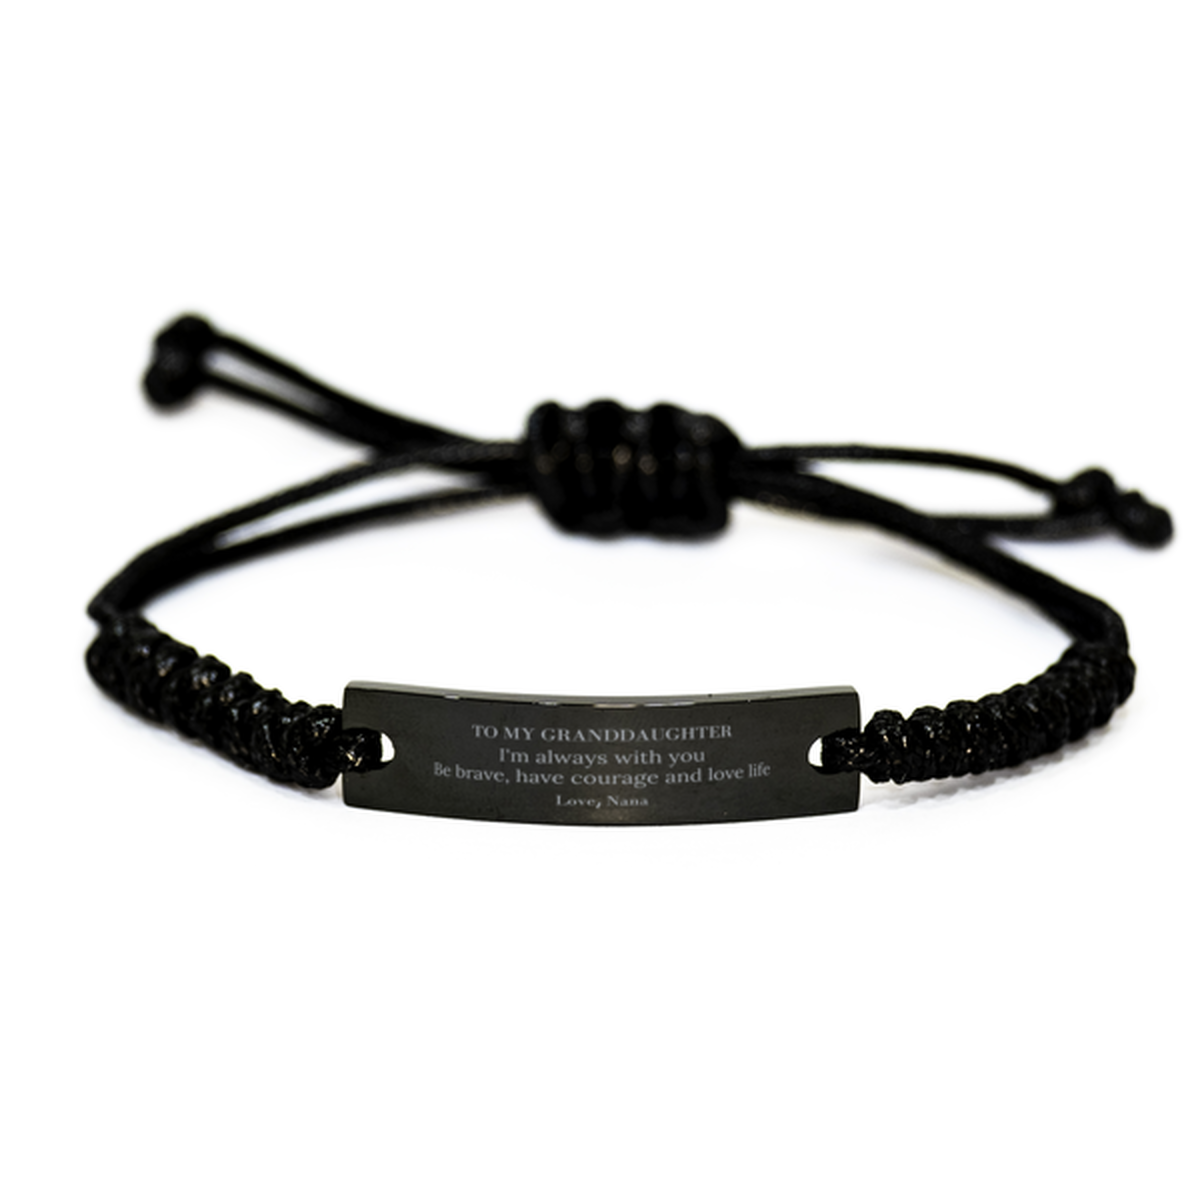 To My Granddaughter Gifts from Nana, Unique Black Rope Bracelet Inspirational Christmas Birthday Graduation Gifts for Granddaughter I'm always with you. Be brave, have courage and love life. Love, Nana